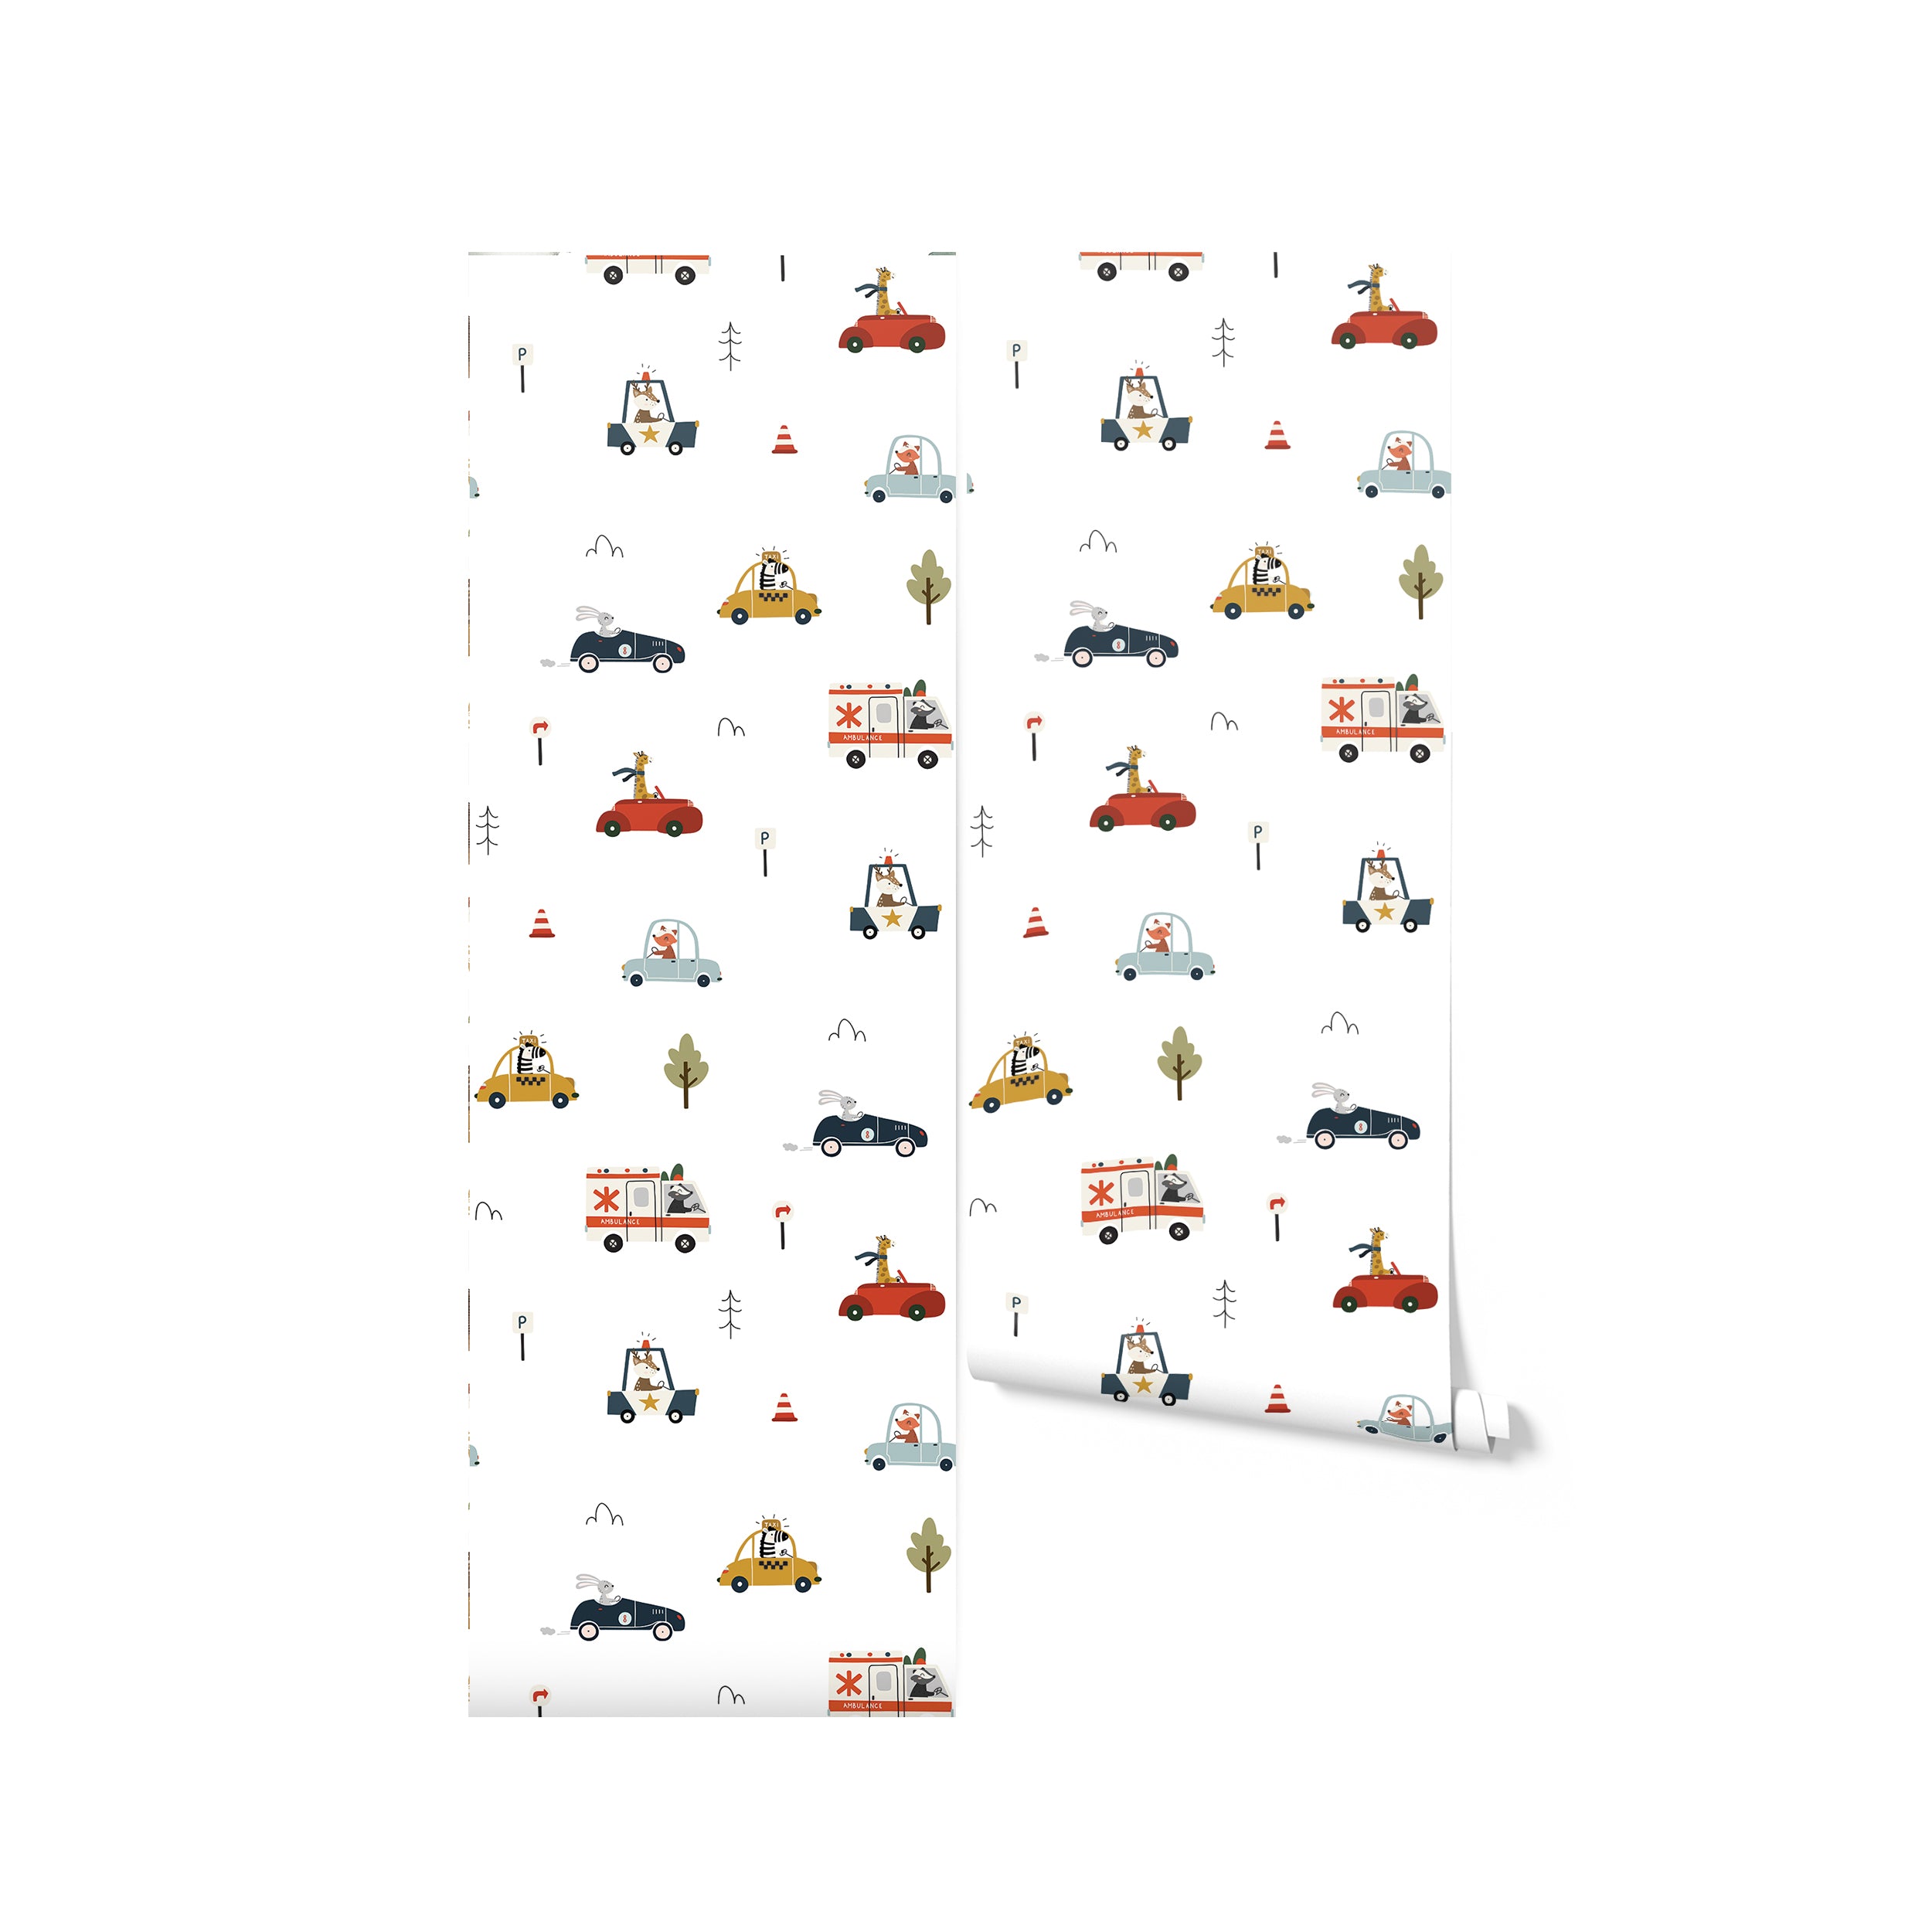 A roll of Cute Cars Wallpaper 02 depicting a whimsical pattern of various cartoon vehicles like police cars, taxis, and ambulances driven by cute animals, interspersed with road elements and greenery, perfect for a child's bedroom or play area.